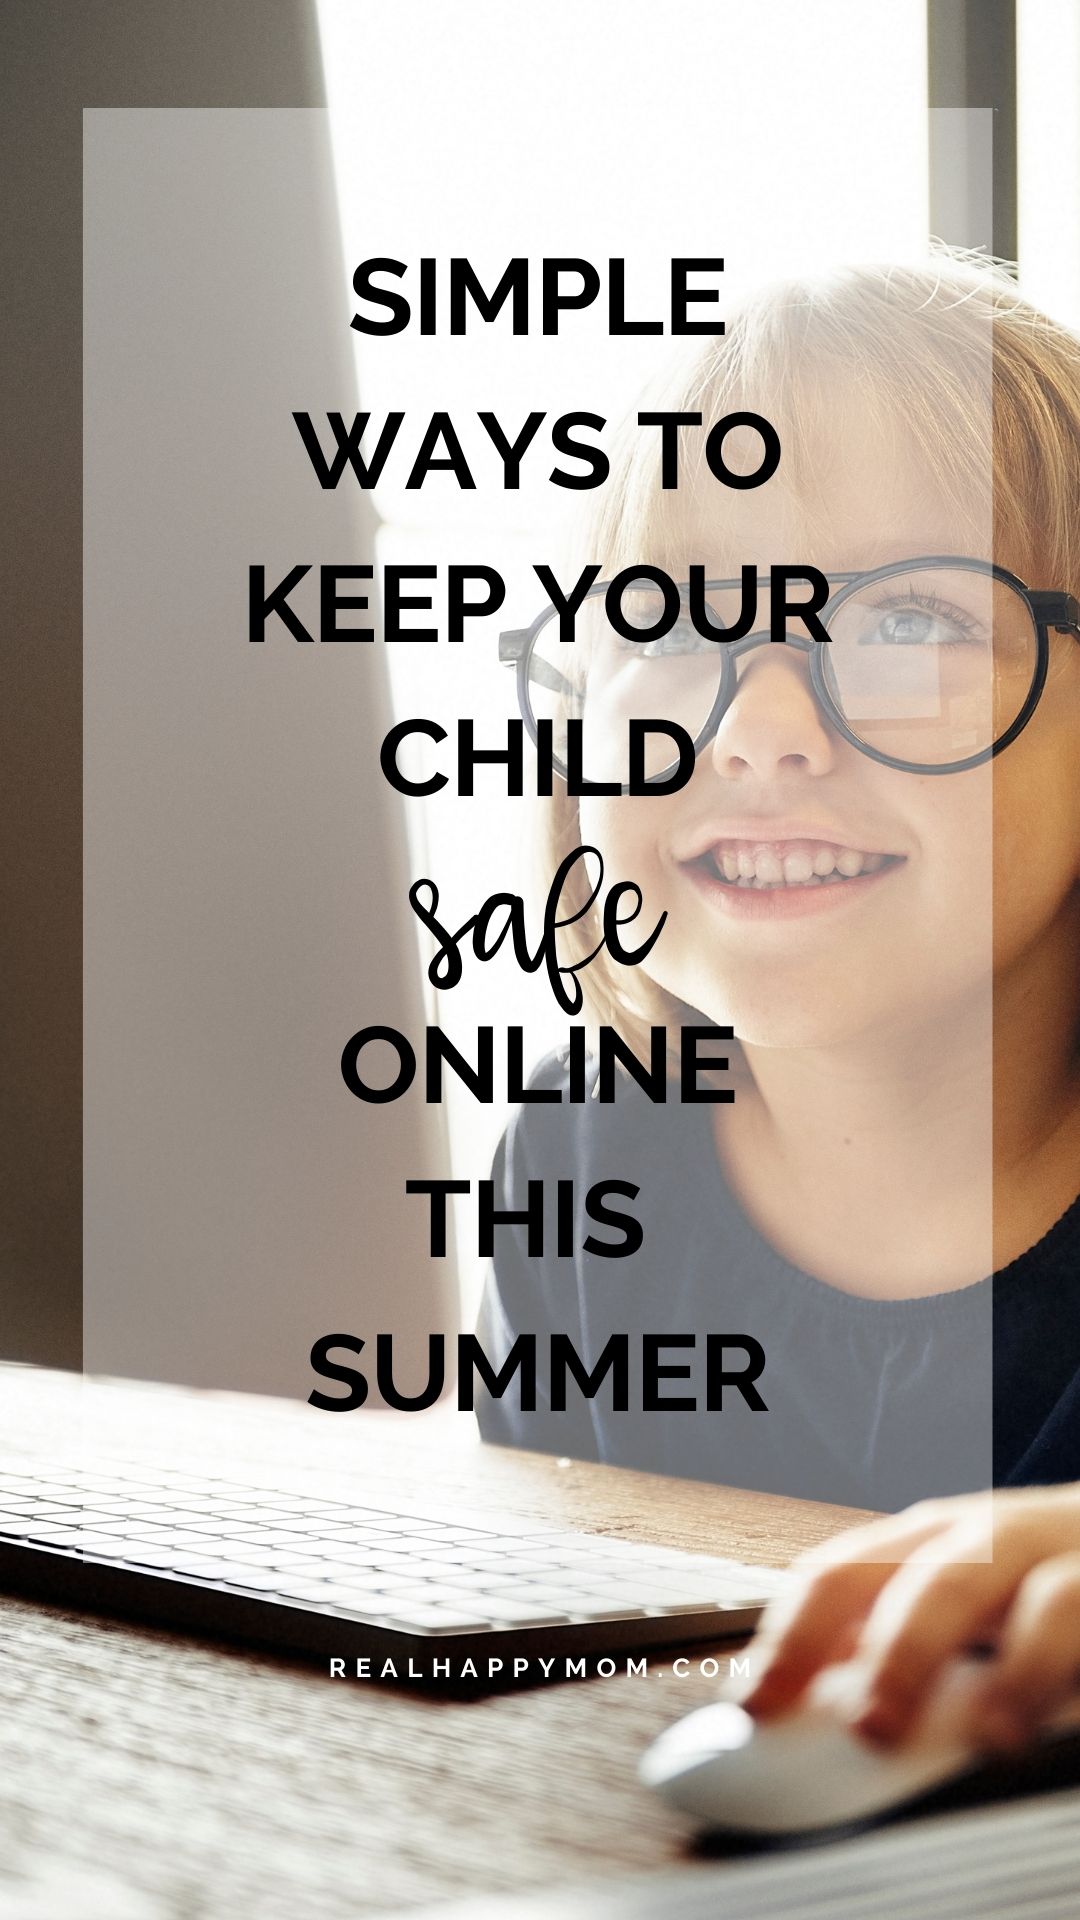 Simple Ways to Keep Your Child Safe Online This Summer